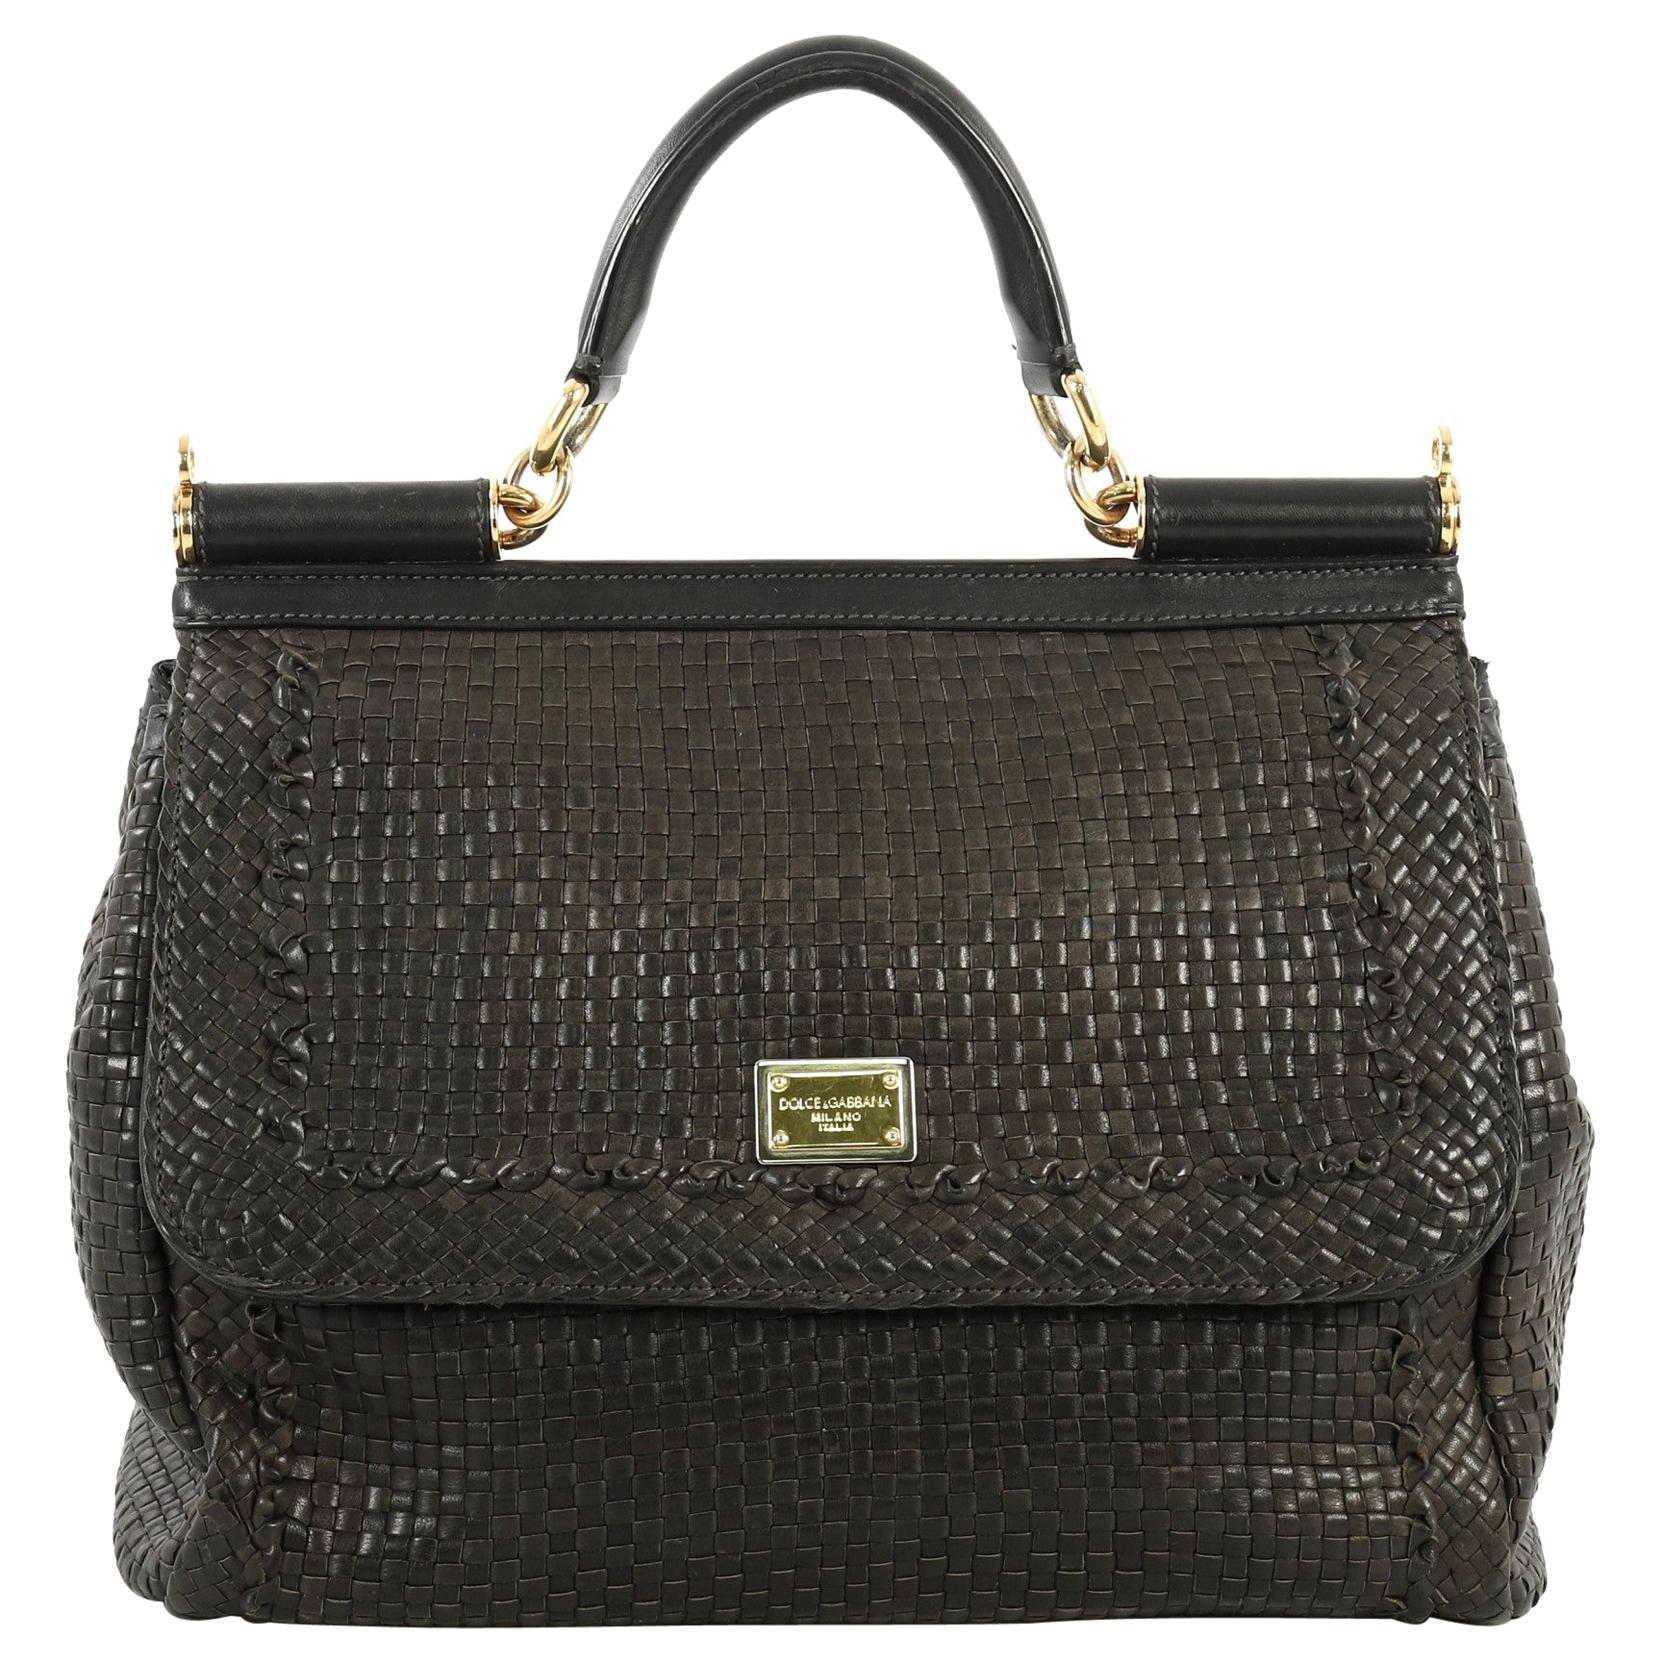 Dolce & Gabbana Miss Sicily Bag Woven Leather Large